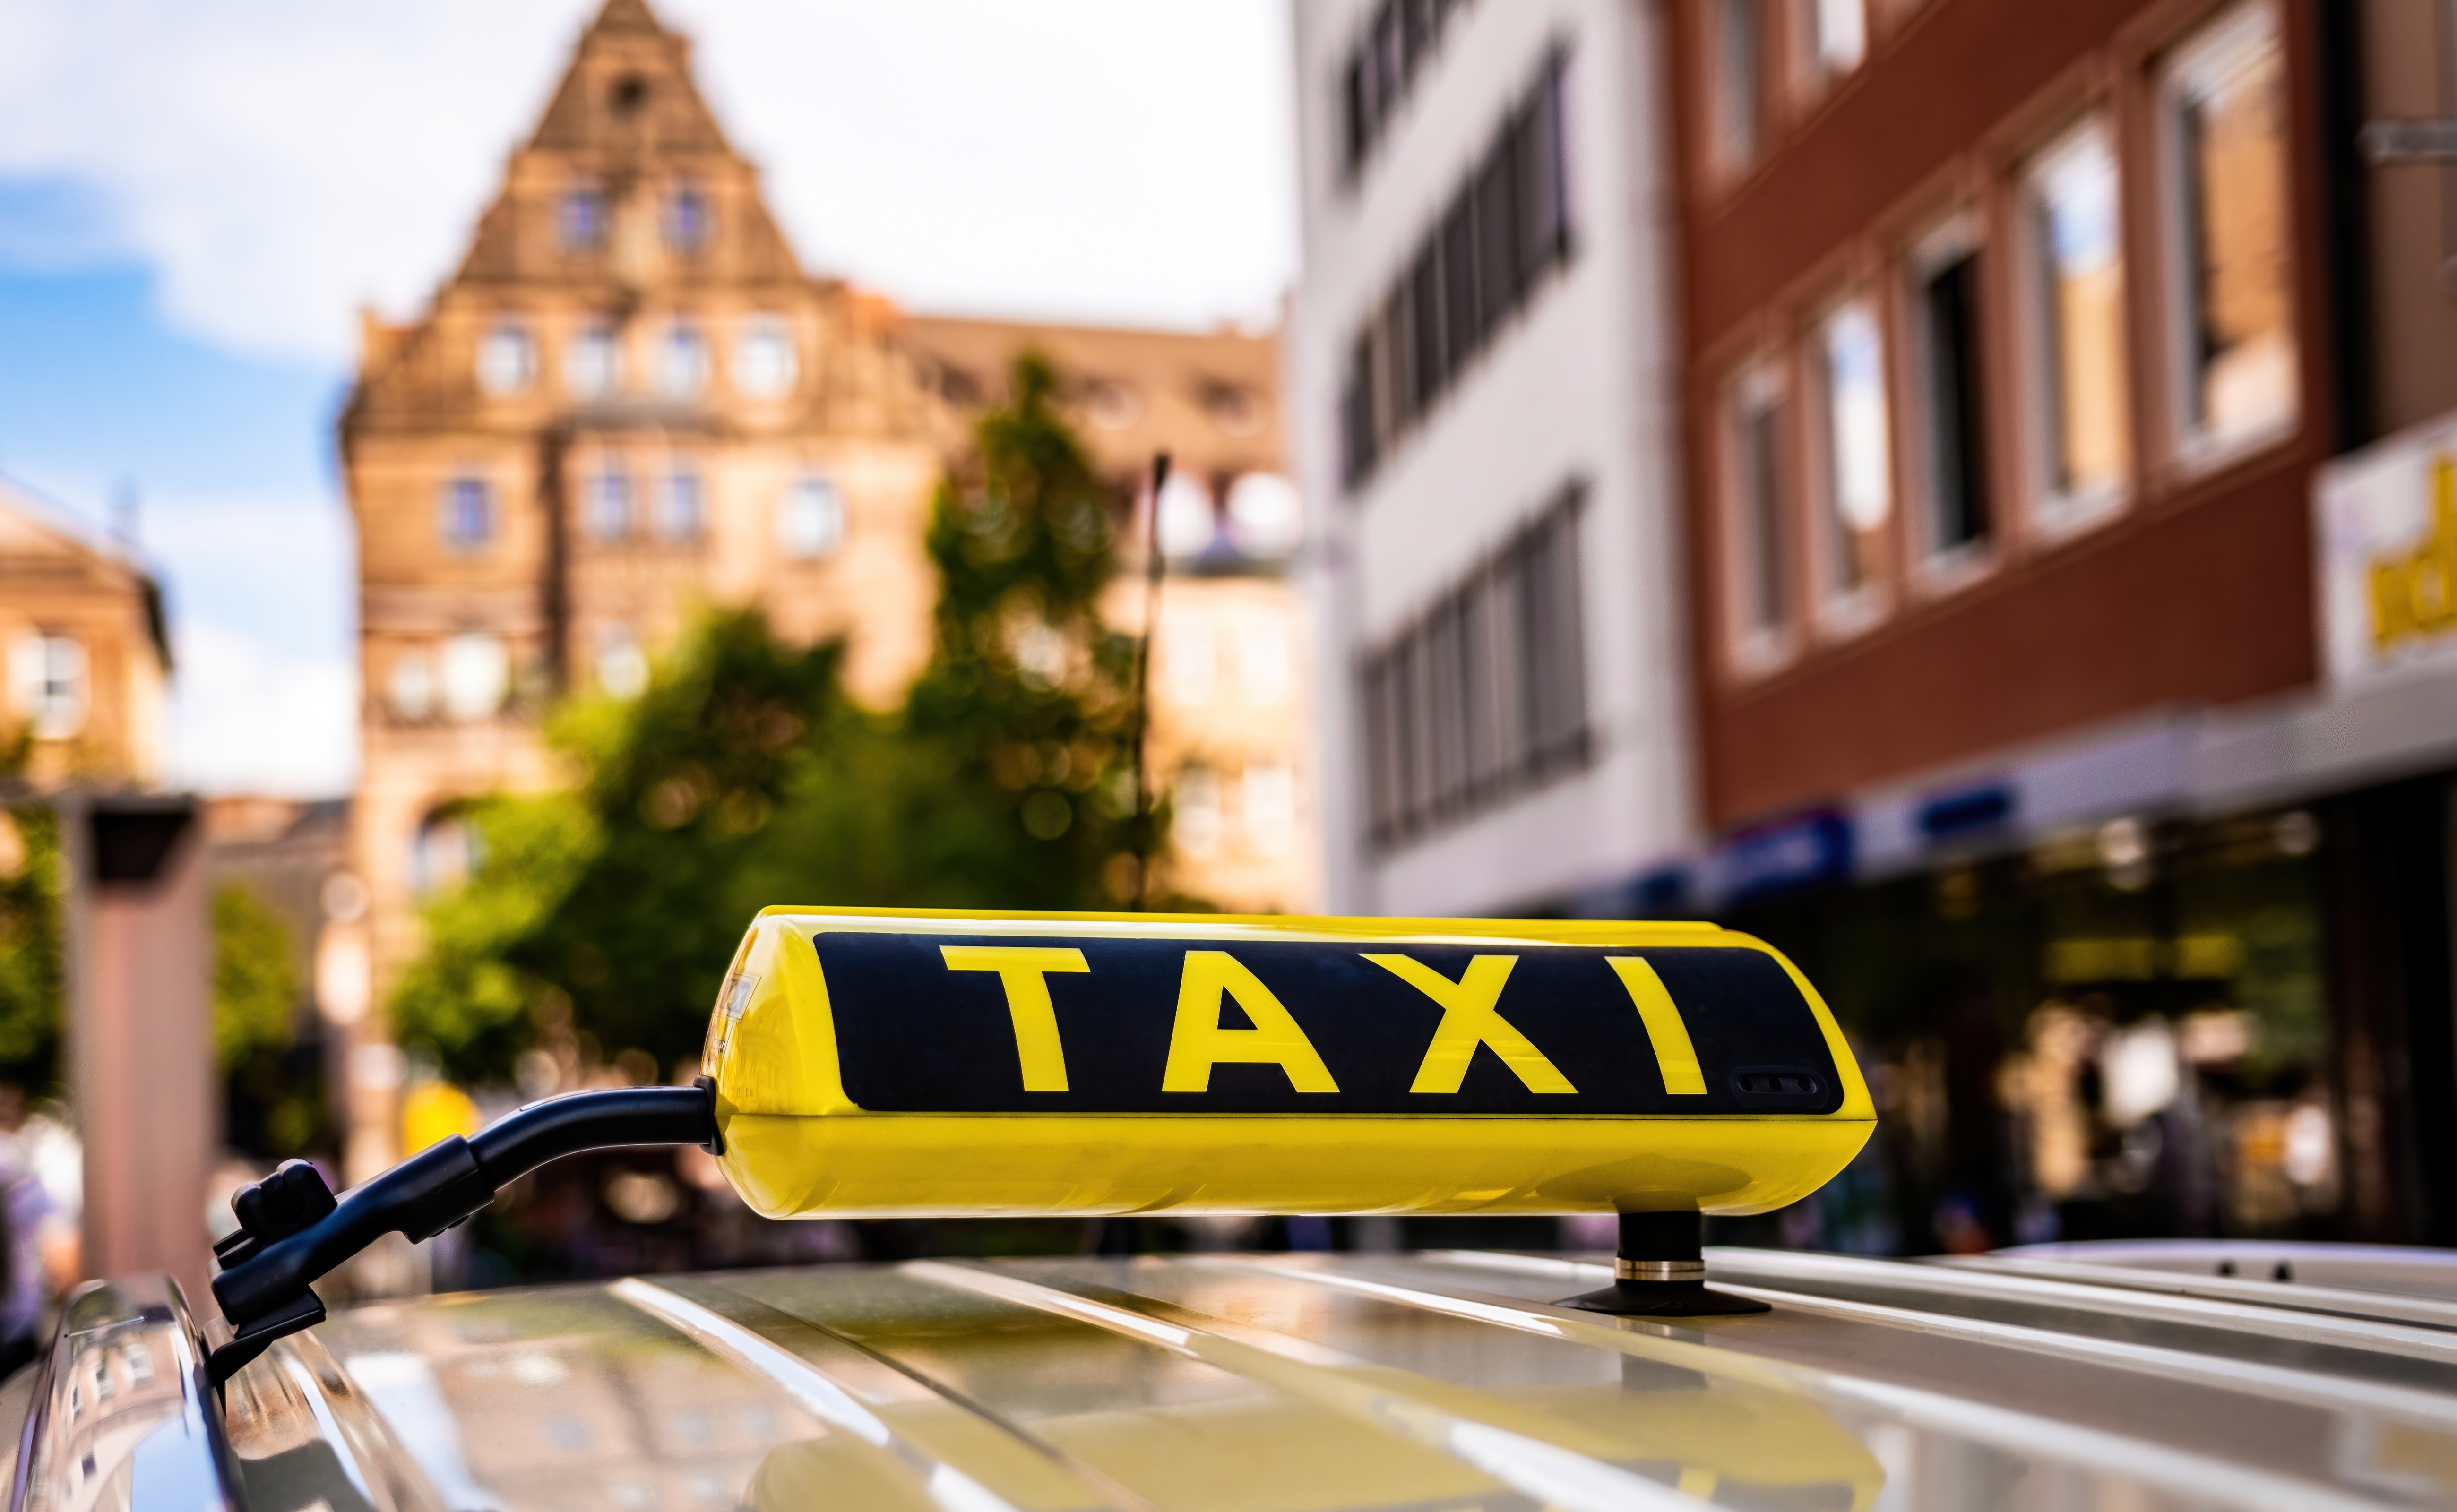 Yellow taxi sign. | Source: Shutterstock